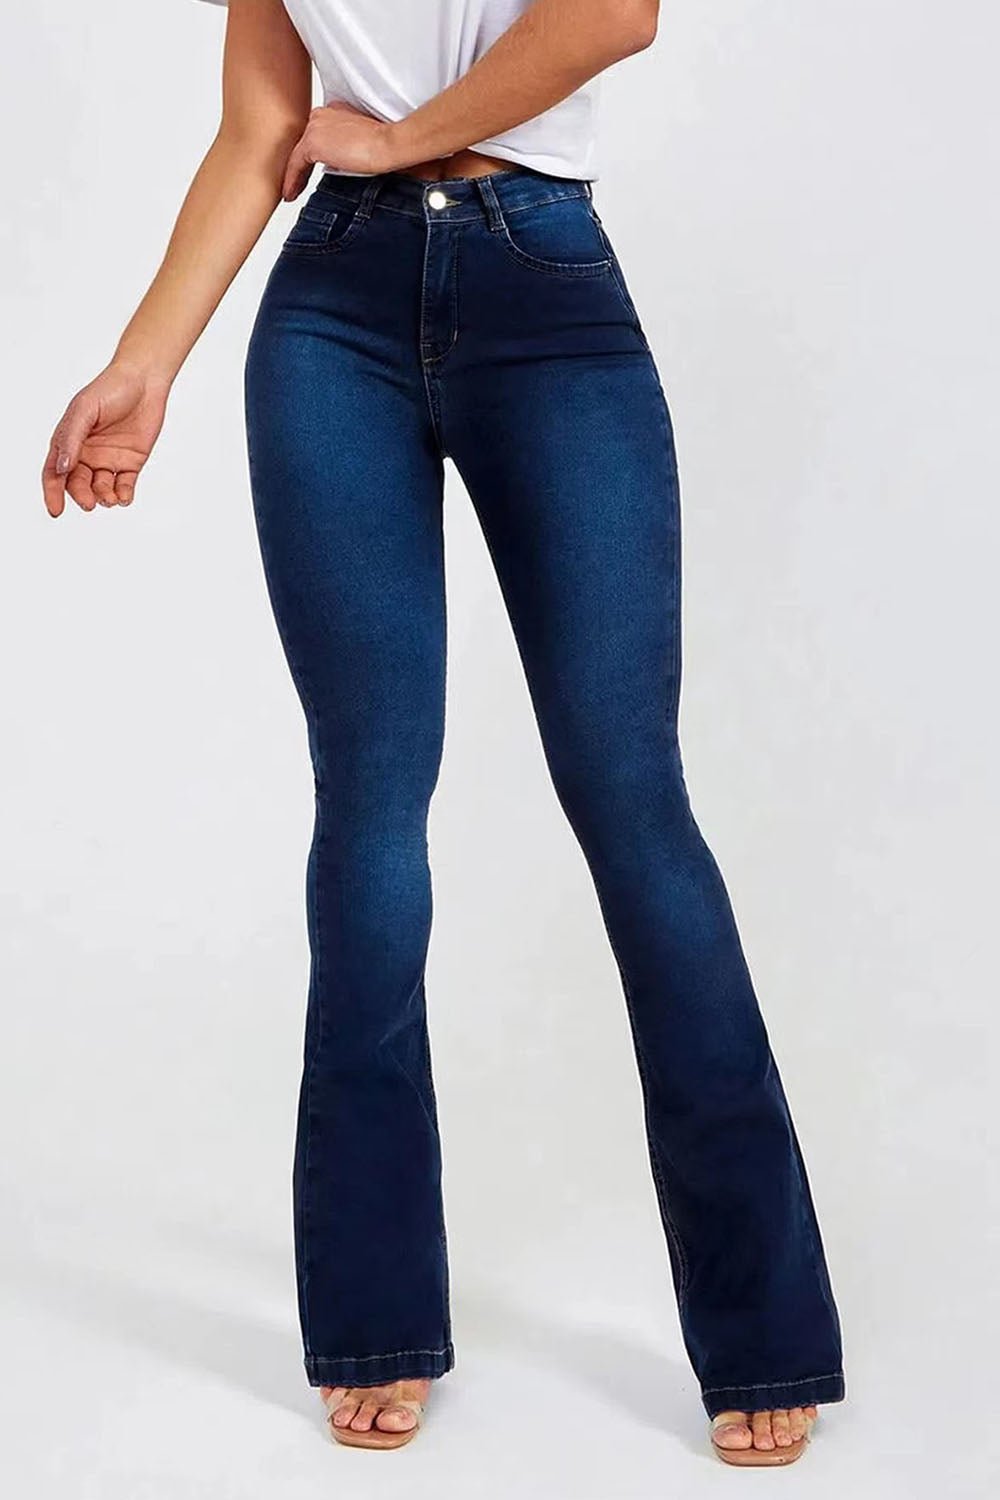 Theia Button Fly Long Jeans - Tangerine Goddess